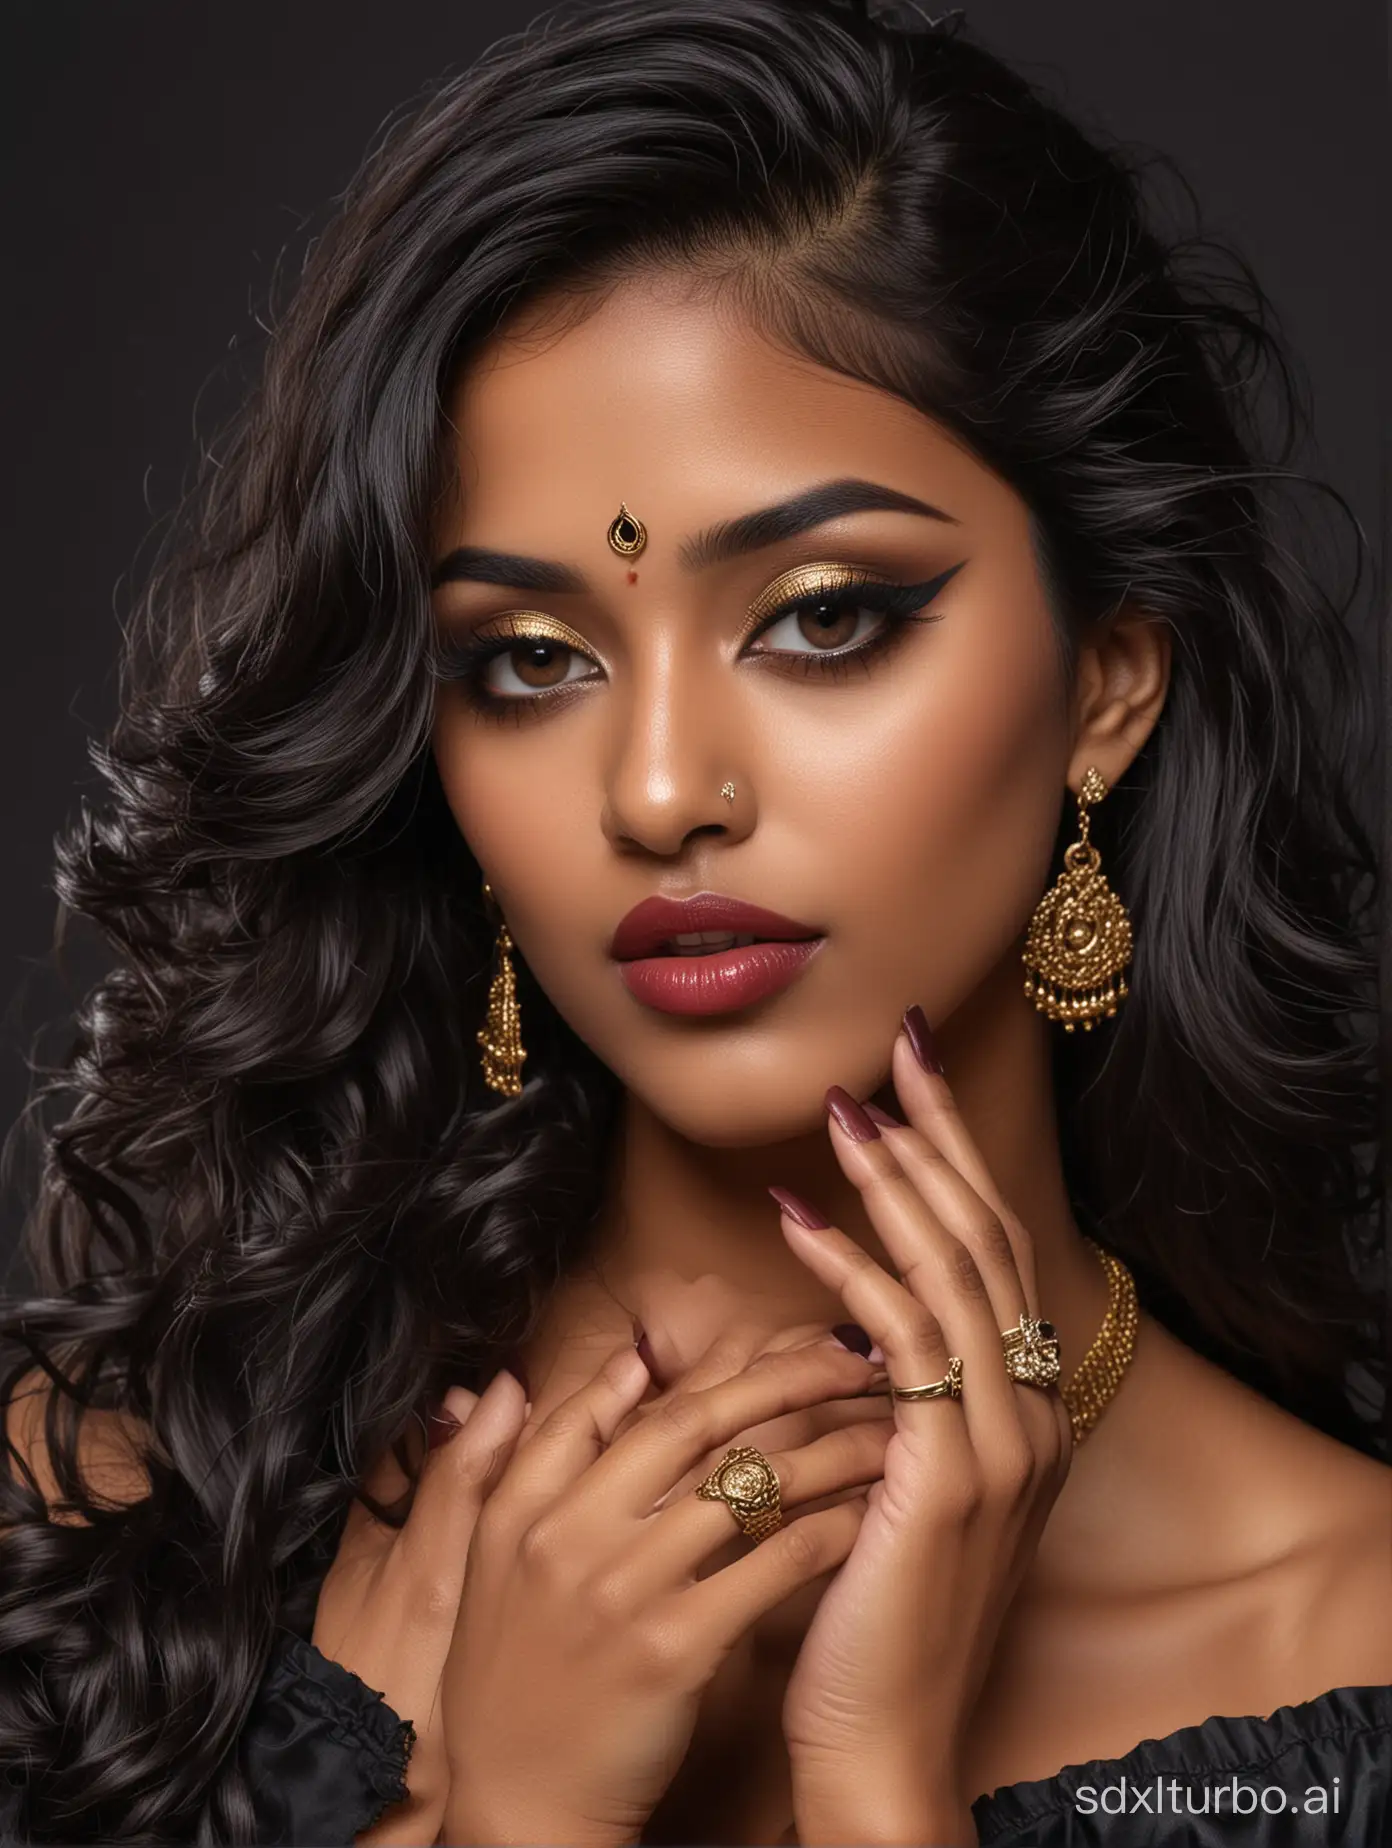 hyper realistic Closeup shot image of an tan black colored south indian tamil lady, wearing Christian nun dress,straight curly glossy hair, glossy leather corset outfit, wearing gold jewellery nose pentant and ring in lips jwellery,flawless glossy makeup and glossy burgundy lips, kissing lips, nude breast,golden black eyeshadow and dramatic eyelashes silver grey colour contact lenses, eye makeup, metalic black colour glossy polished finger nails, wearing stockings and high heels sitting in sofa,dark black background.